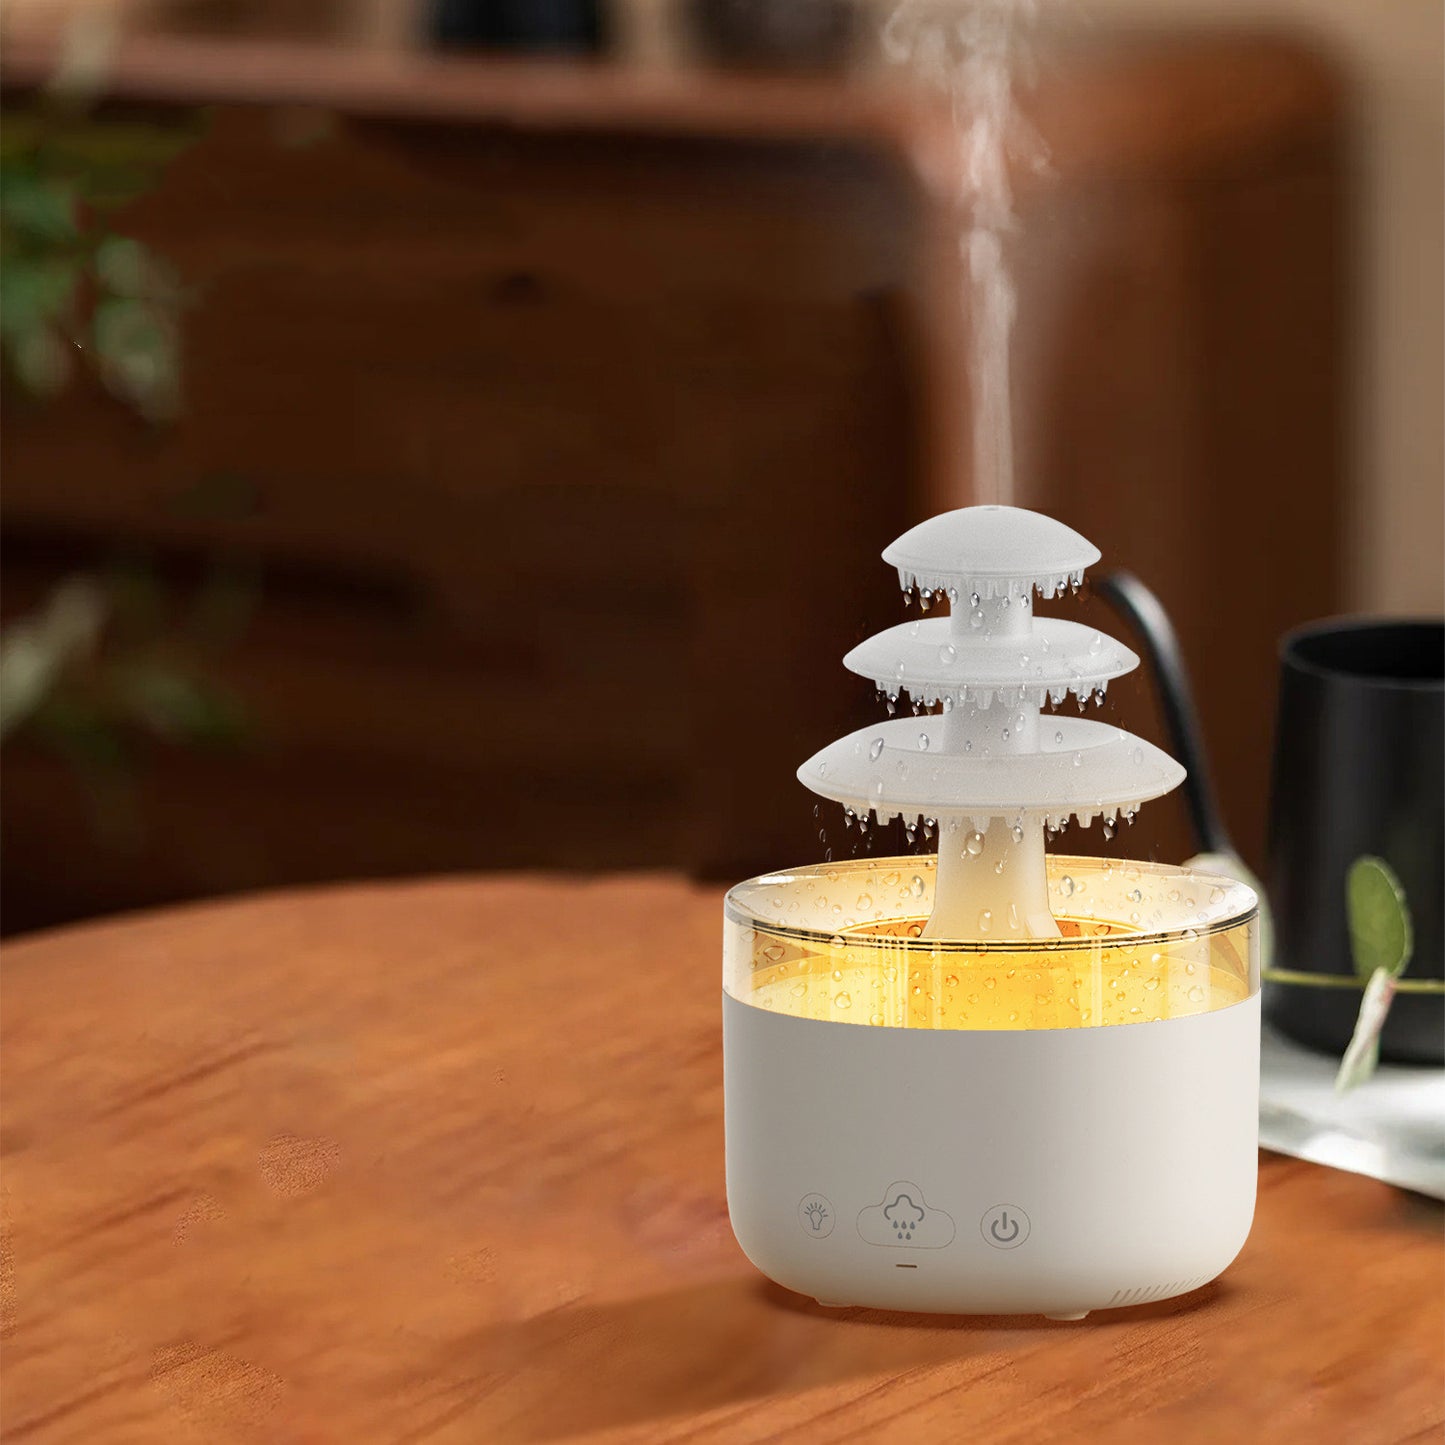 New Rain Air Humidifier, Aromatherapy Diffuser with Essential Oils, Quiet Mist Humidifier with Colorful Light